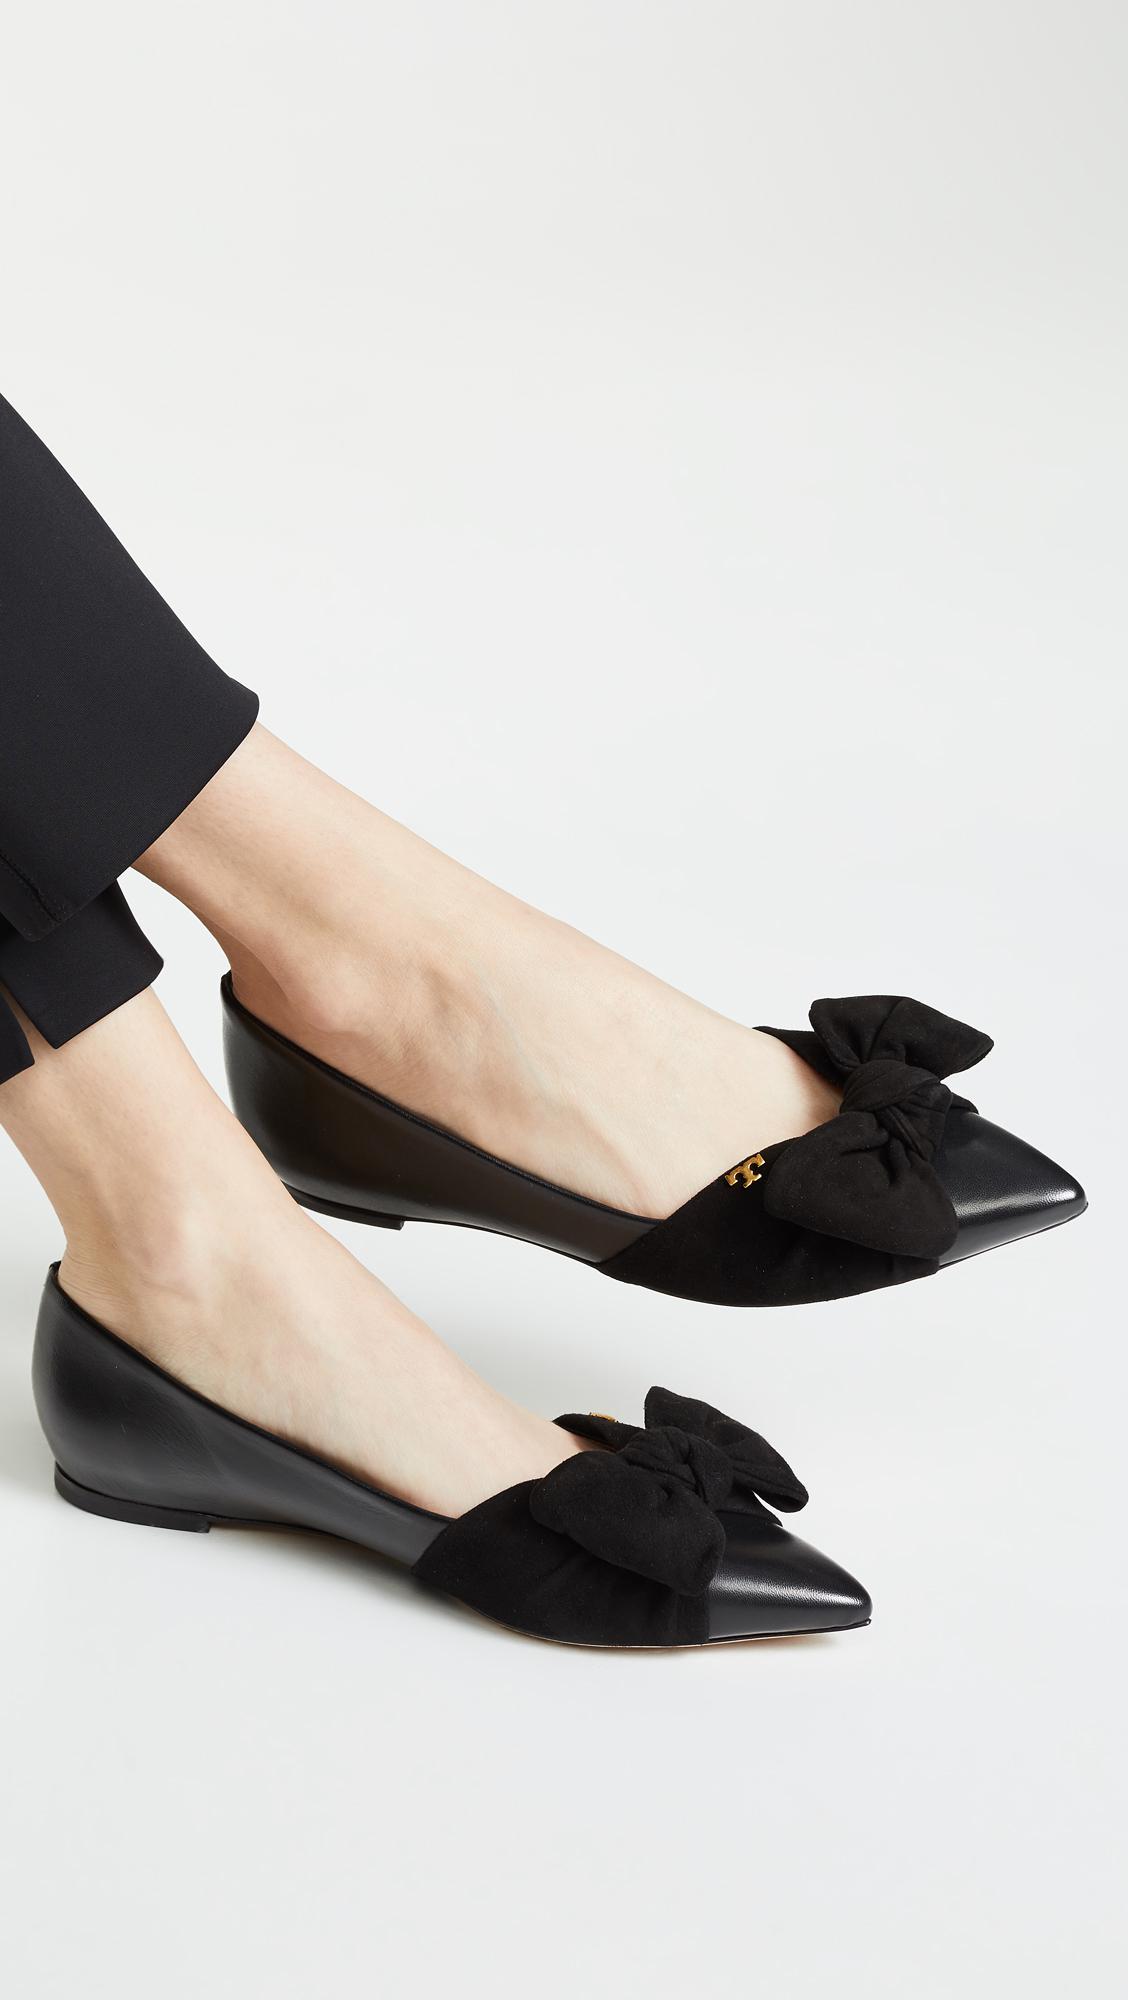 Tory Burch Leather Eleanor Flats in Black - Lyst